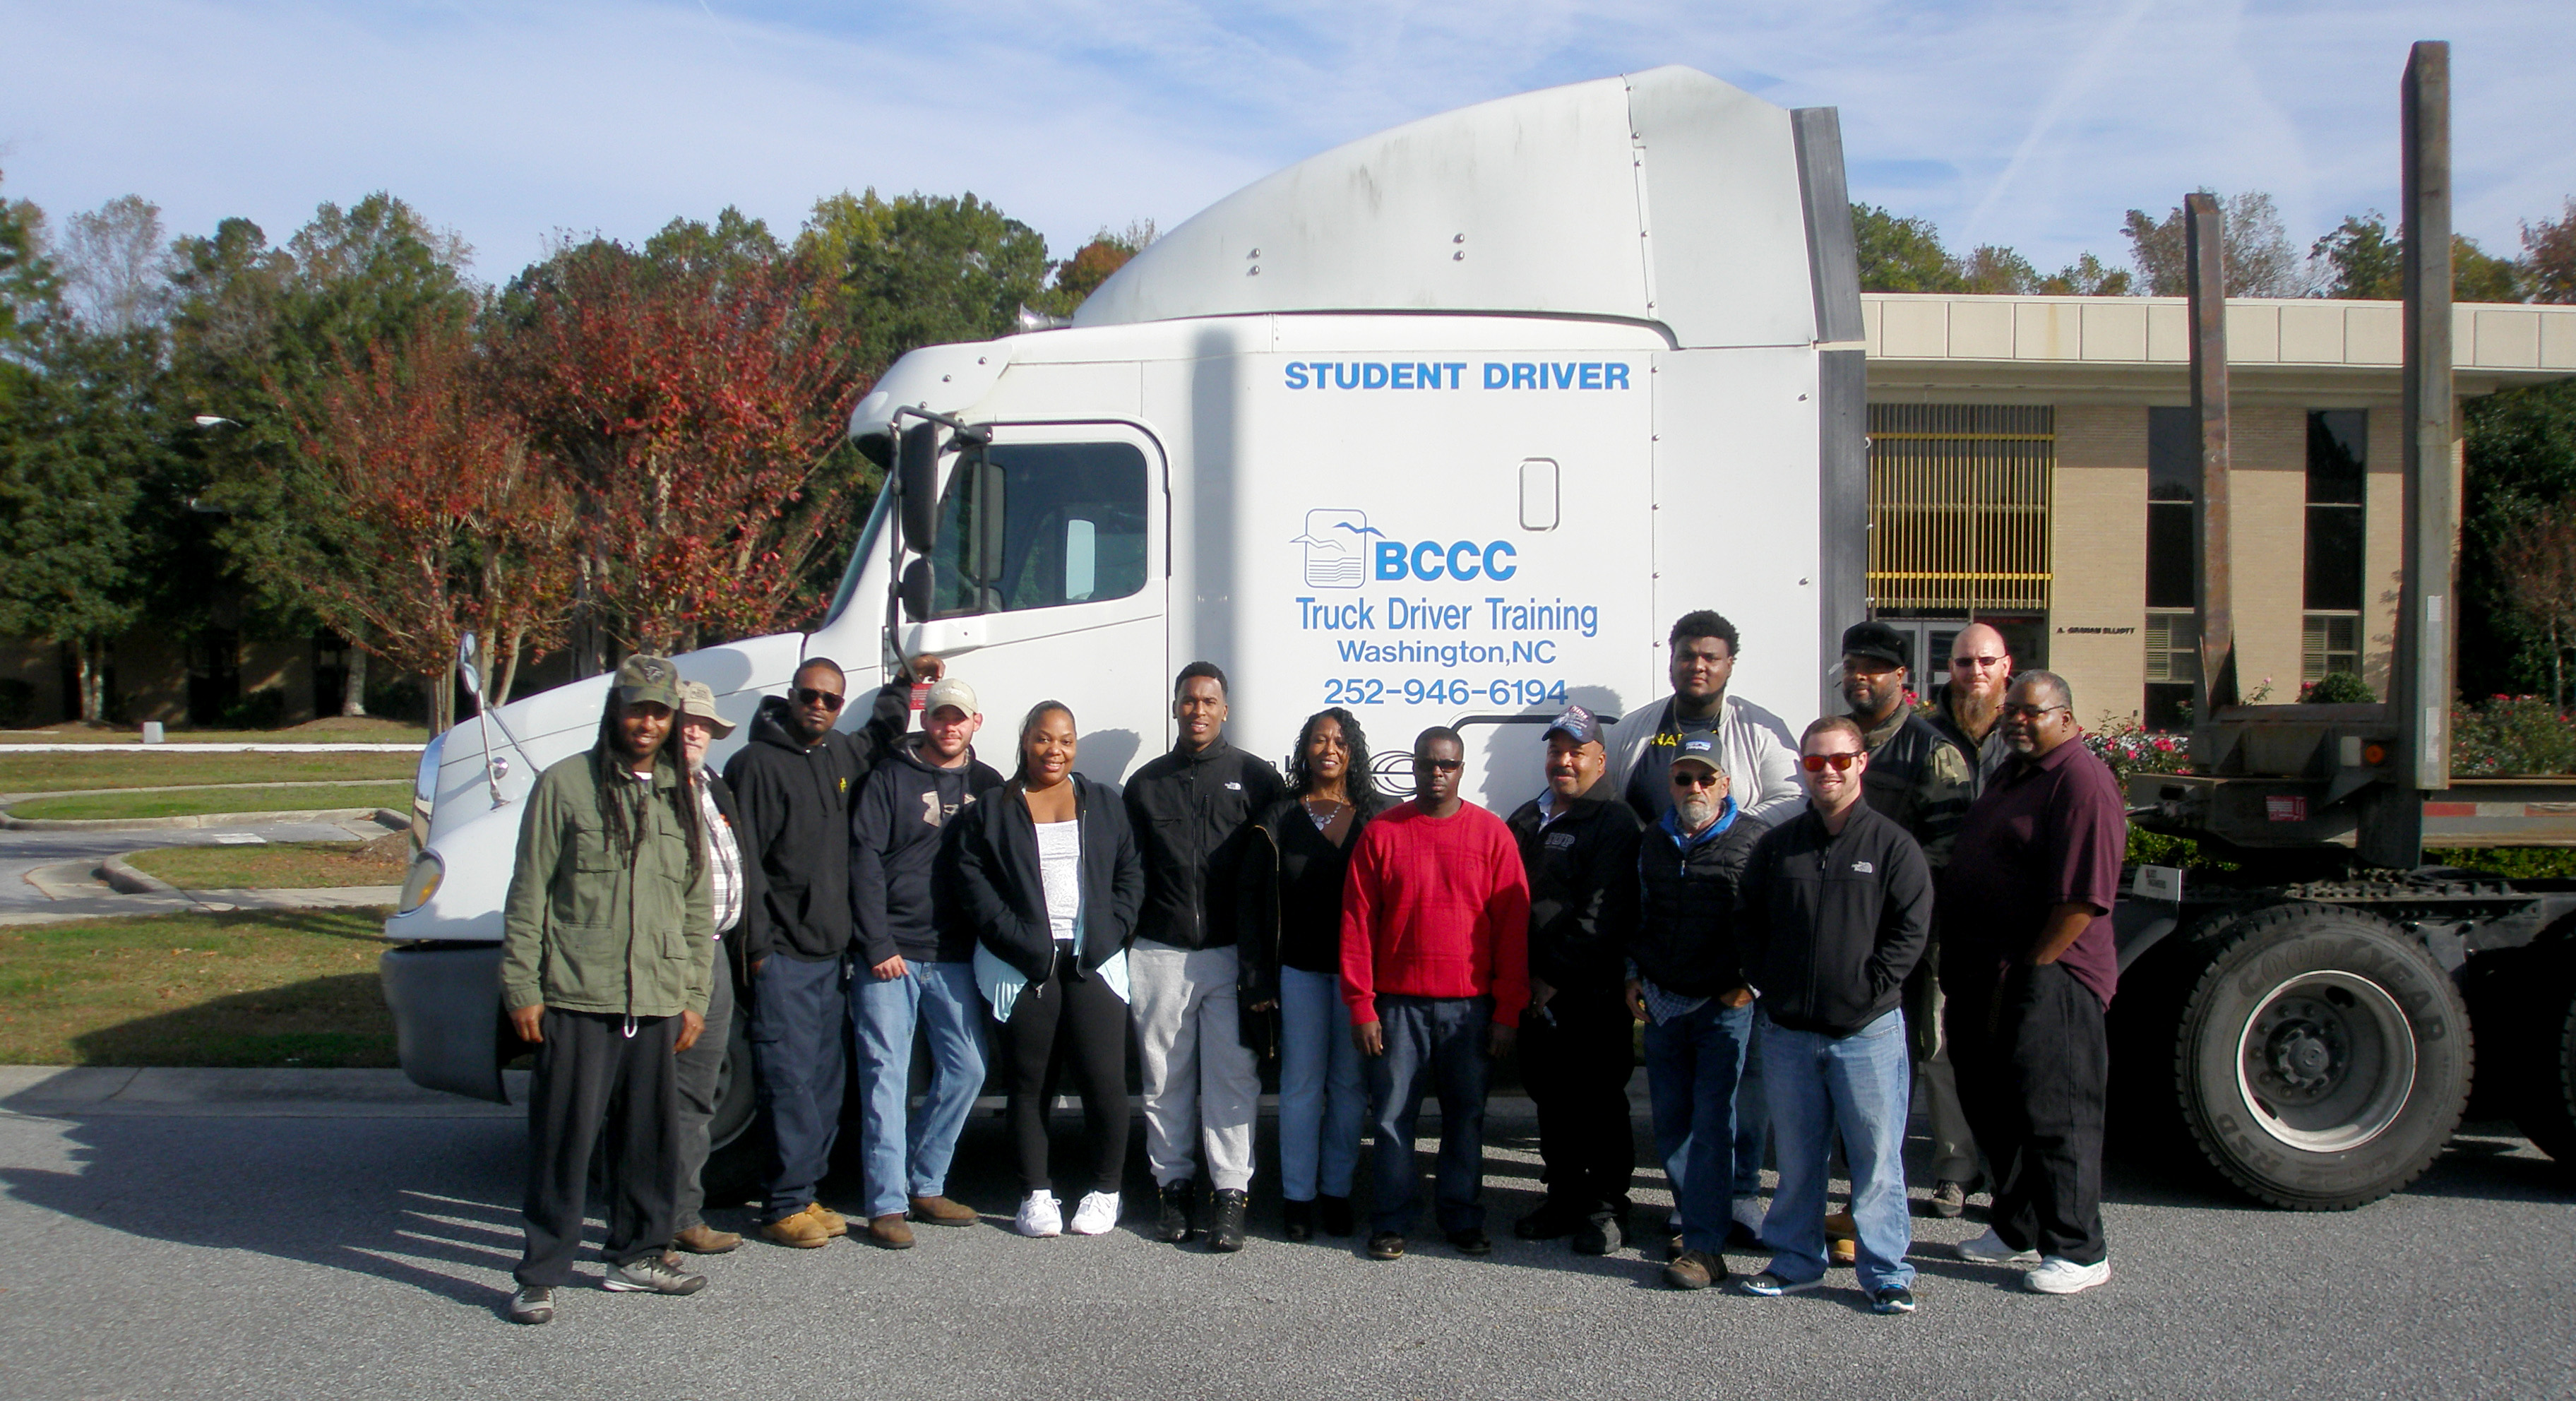 A dozen students stand in front of a truck cab in front of the college.